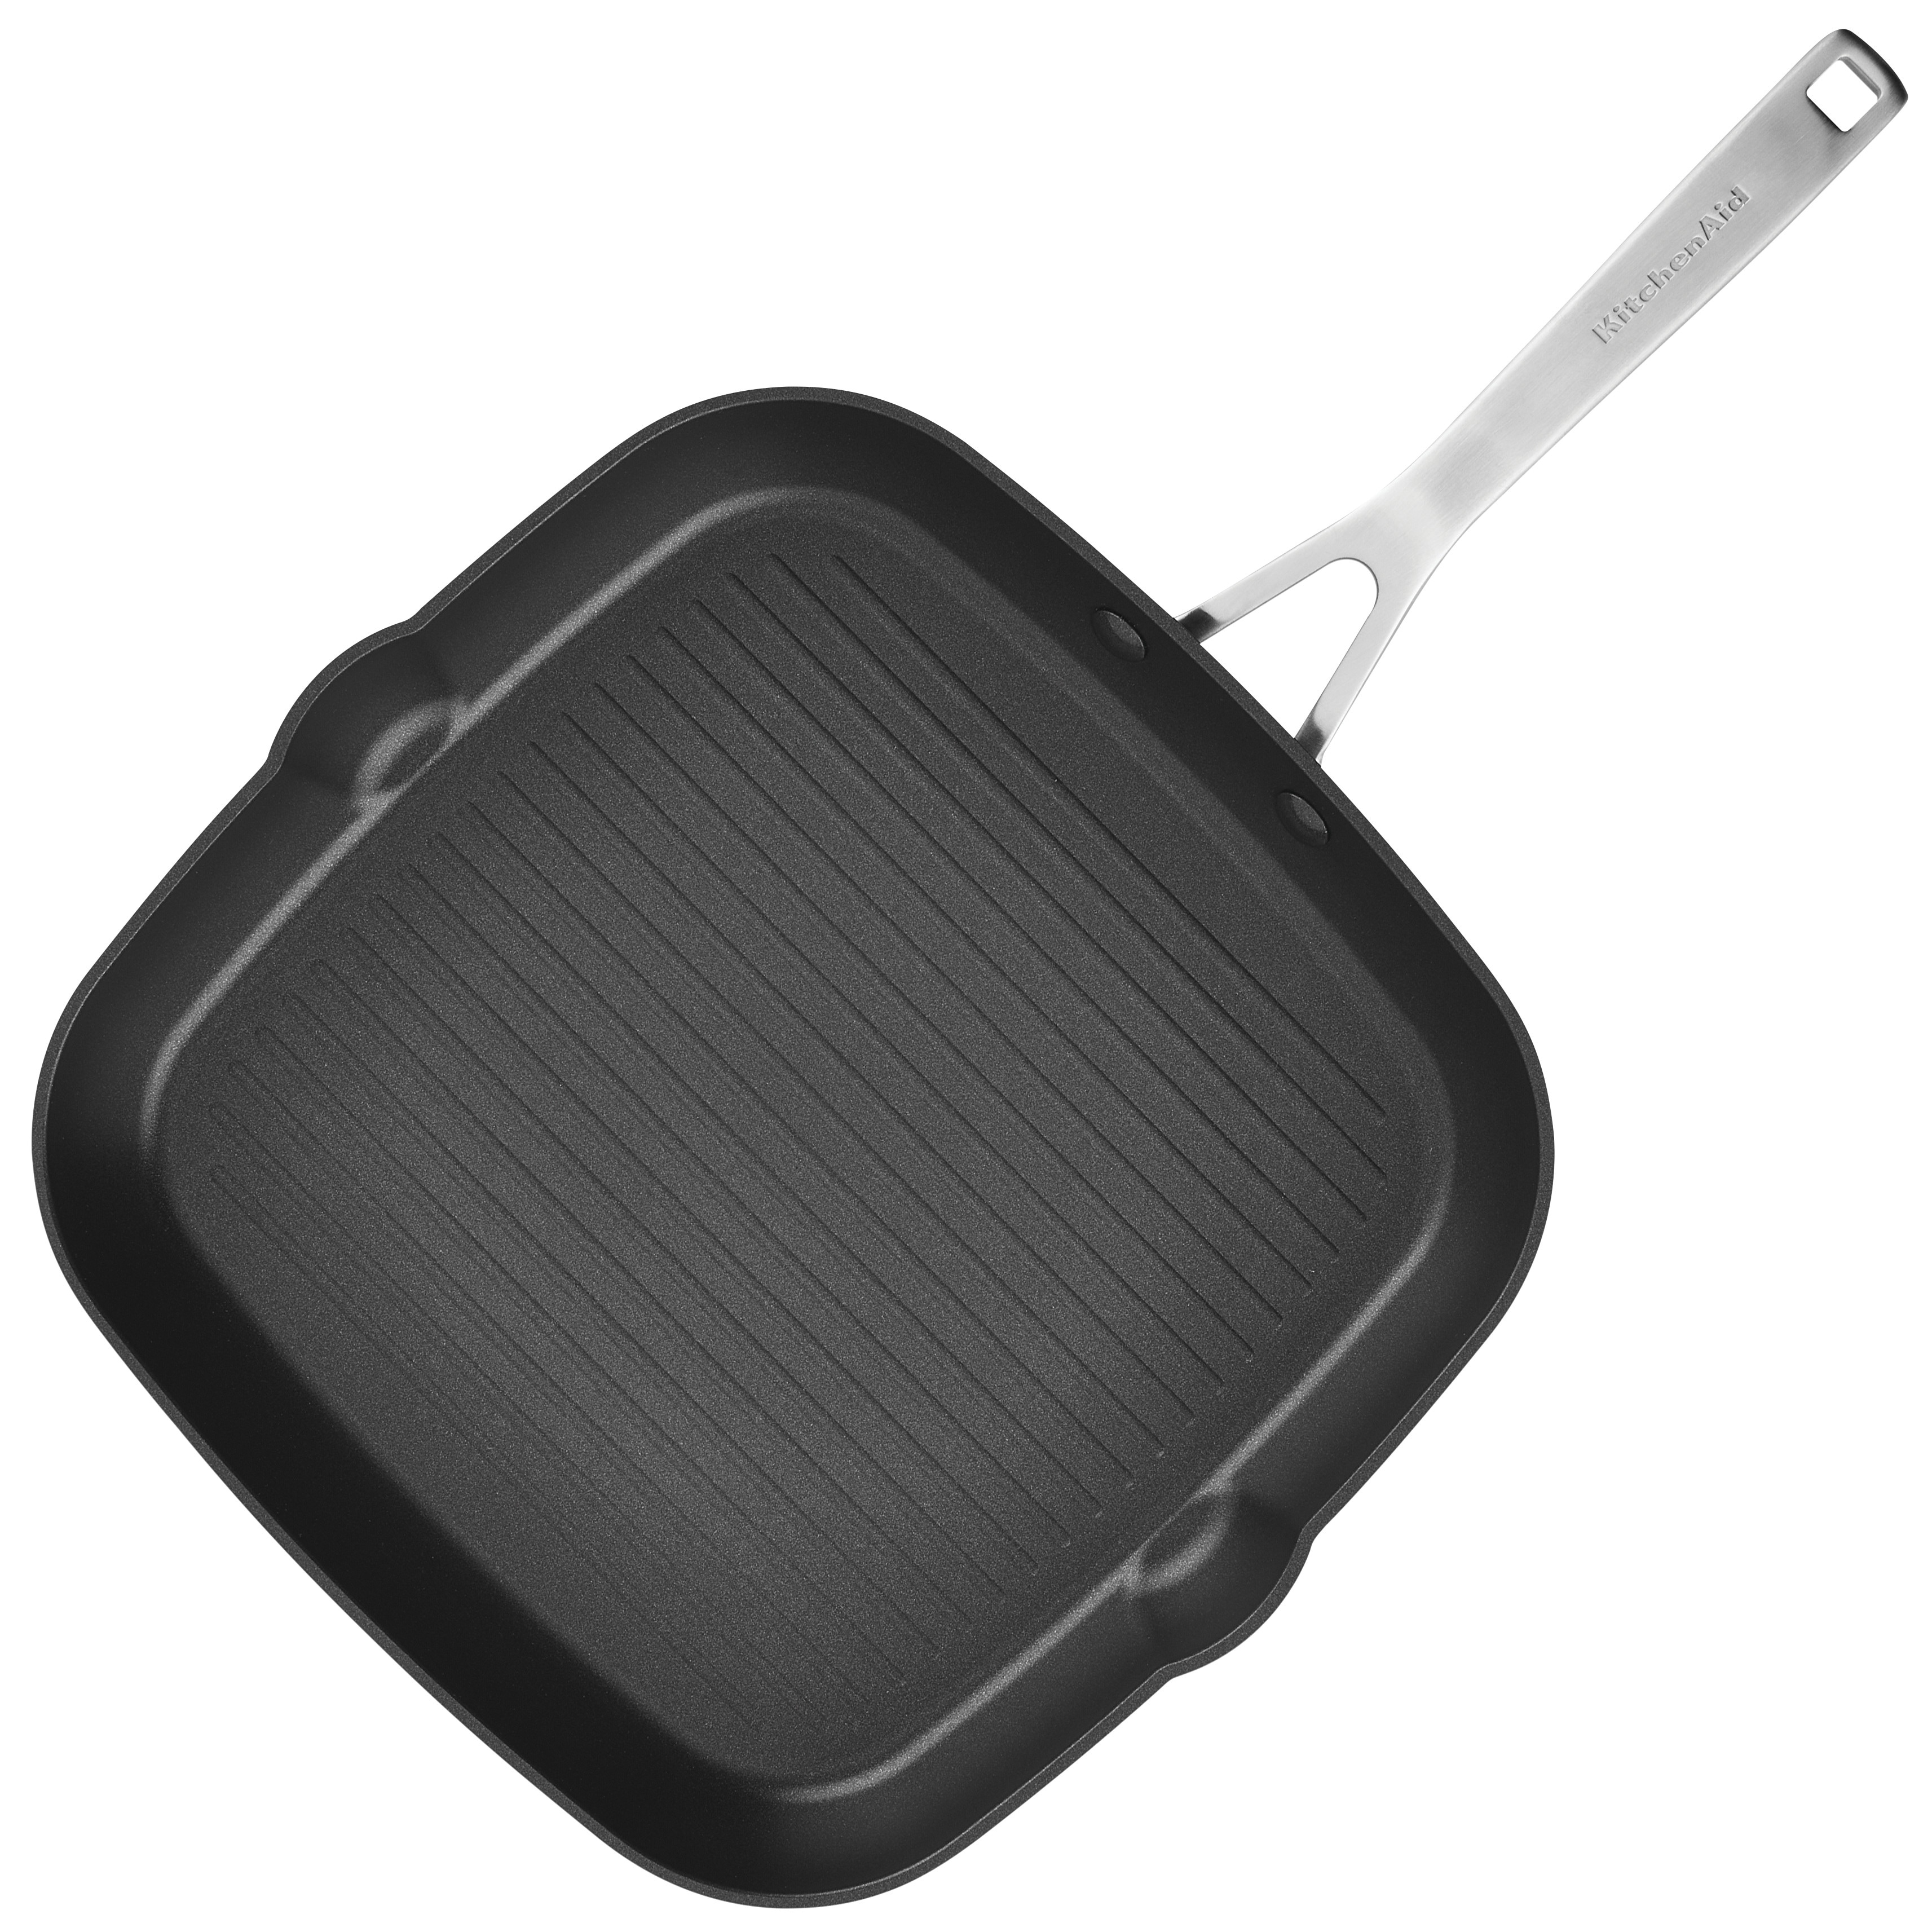 https://ak1.ostkcdn.com/images/products/is/images/direct/e527810e2ff6ea9ff09ef2ff54be692199ef8e7b/KitchenAid-Hard-Anodized-Induction-Nonstick-Stovetop-Grill-Pan%2C-11.25-Inch%2C-Matte-Black.jpg